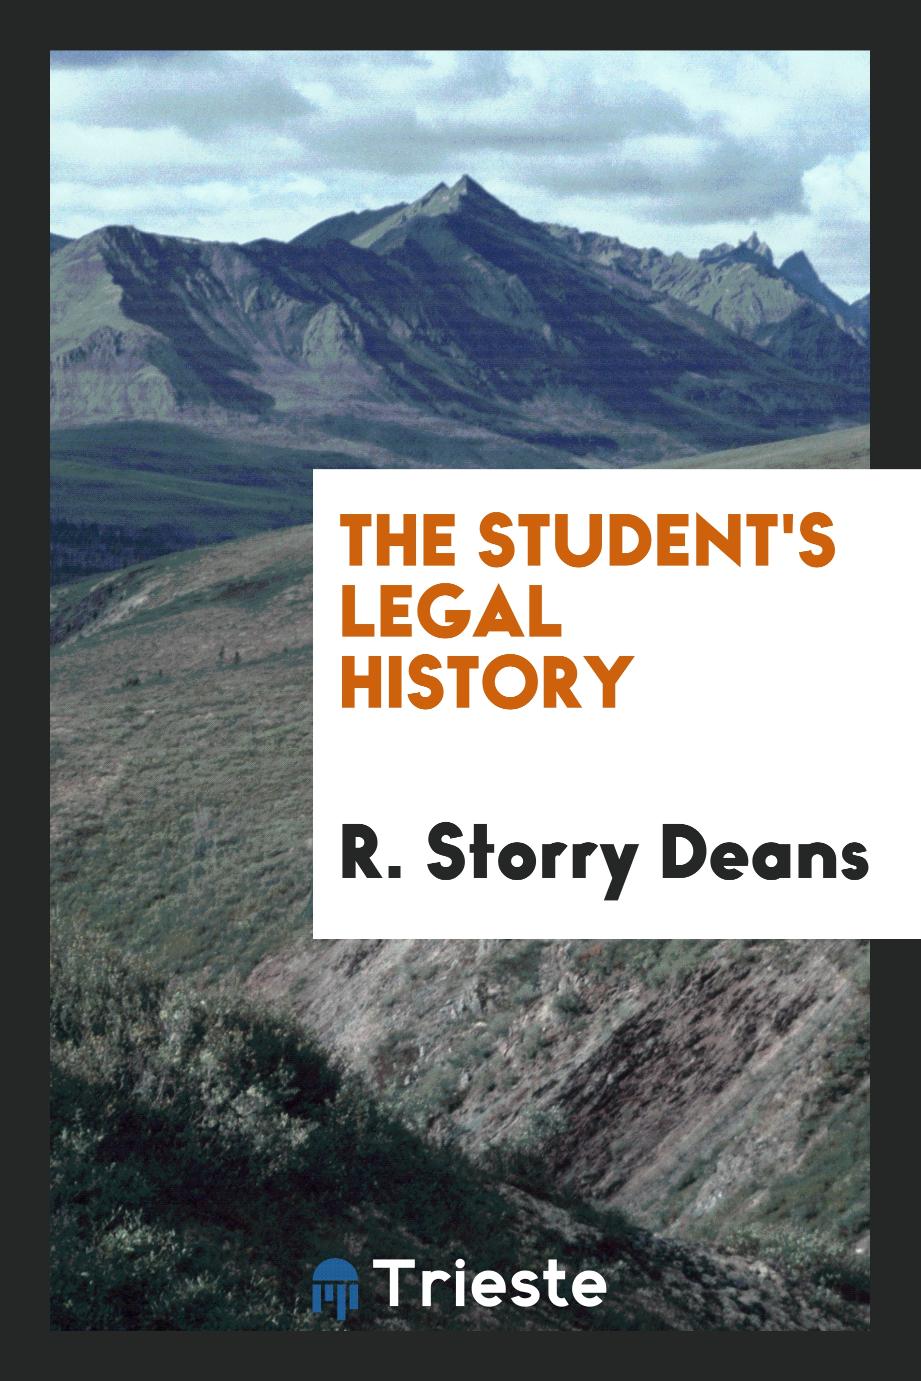 The student's legal history